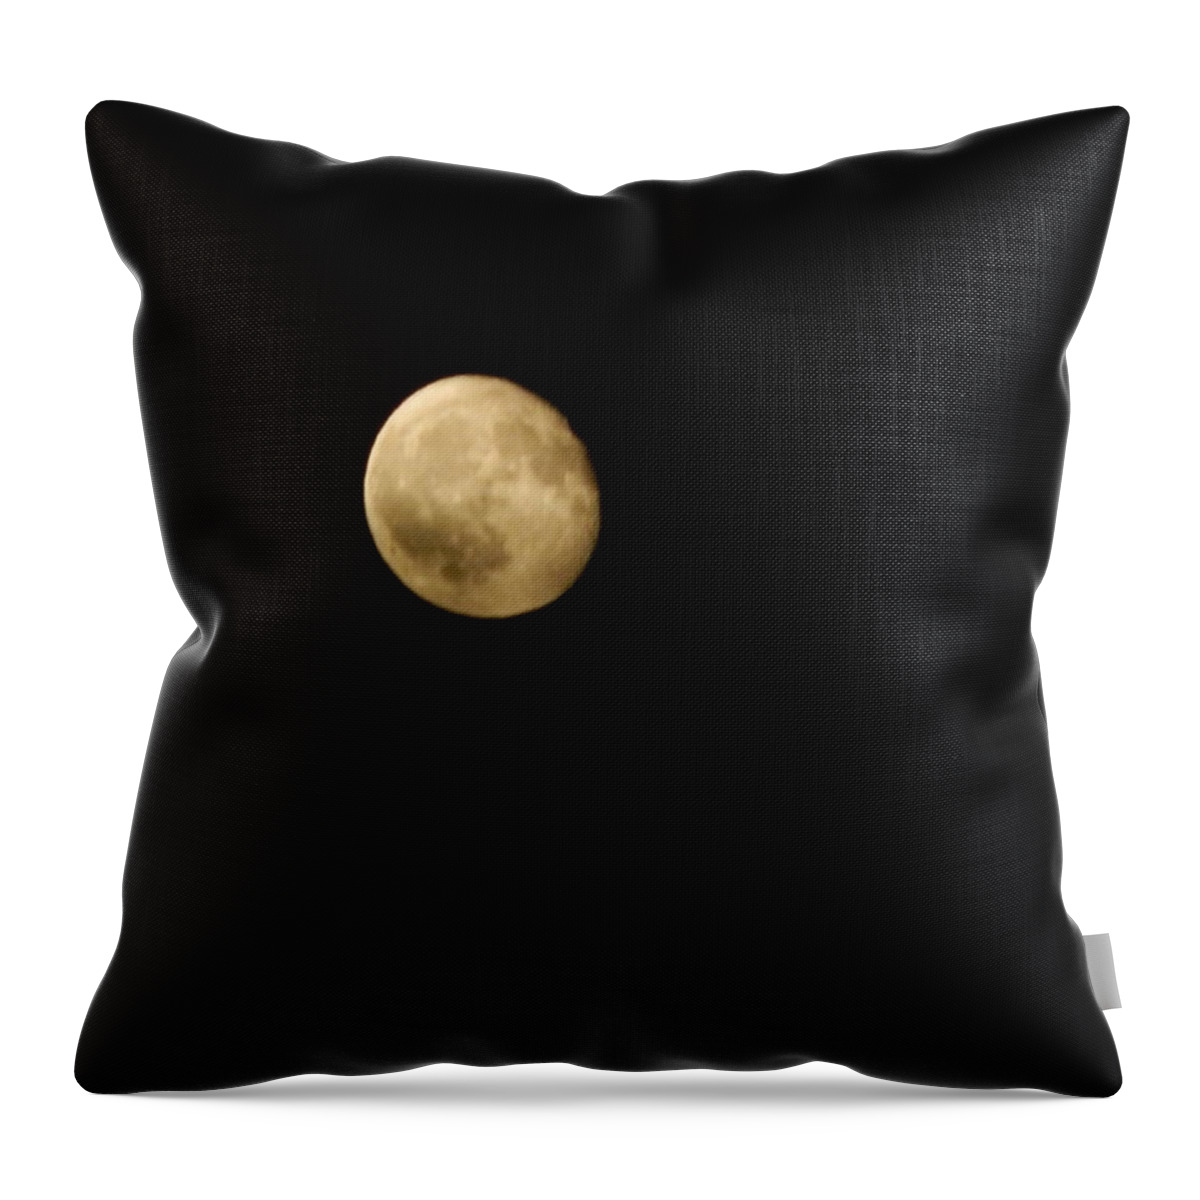 Moon Throw Pillow featuring the photograph Full moon at night in the city shining bright by Oleg Prokopenko